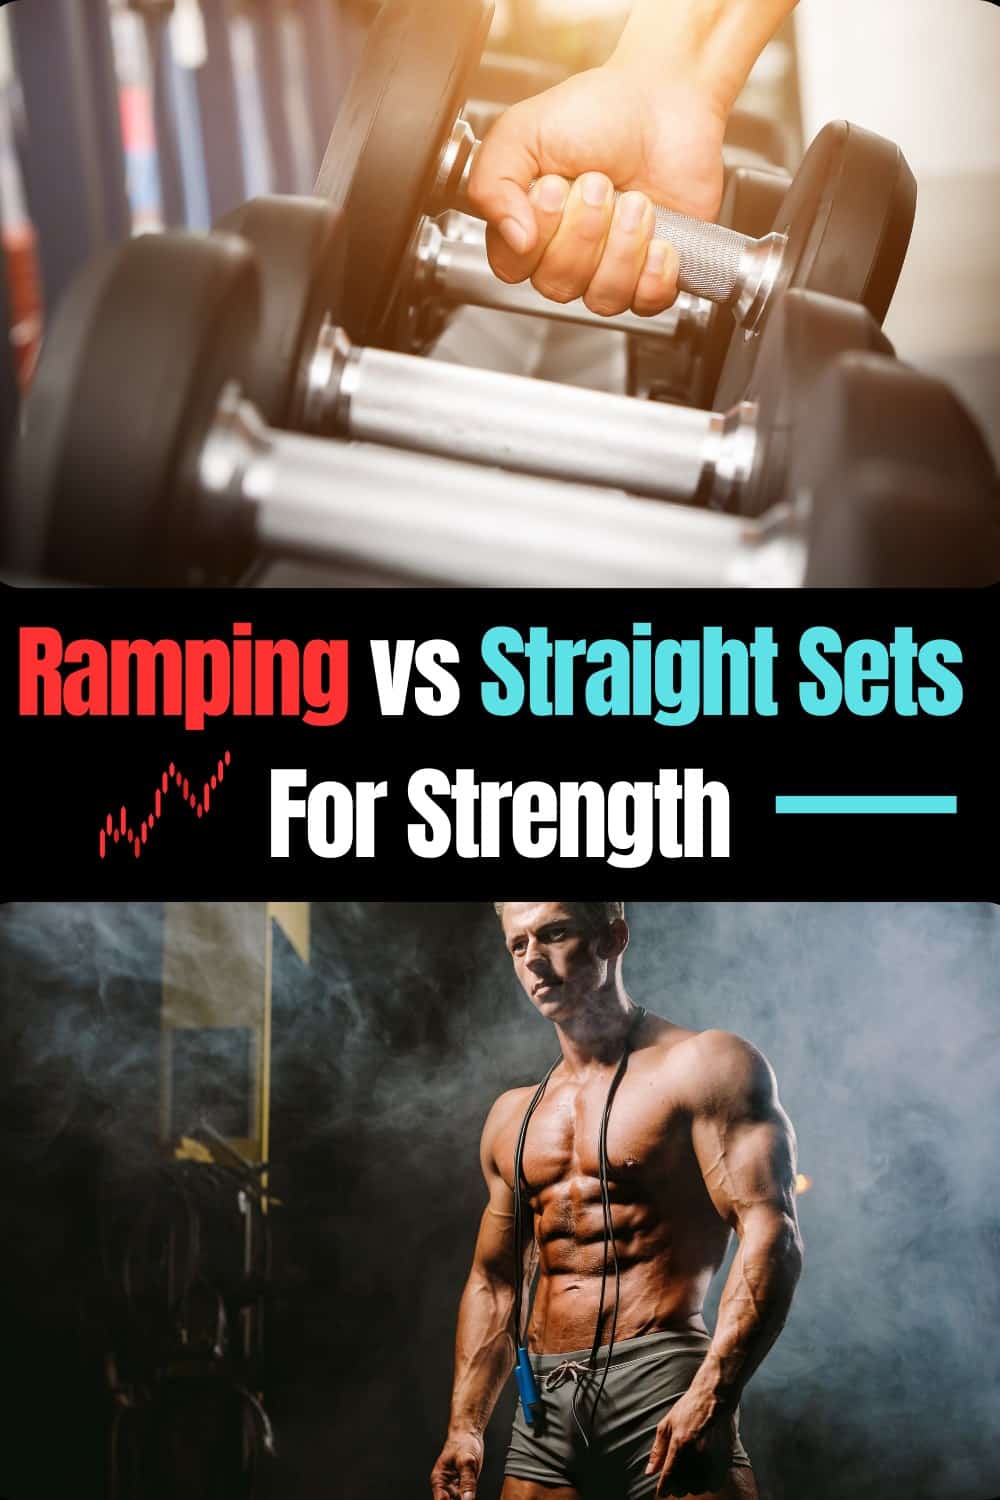 Is Ramping Sets Better for Strength?